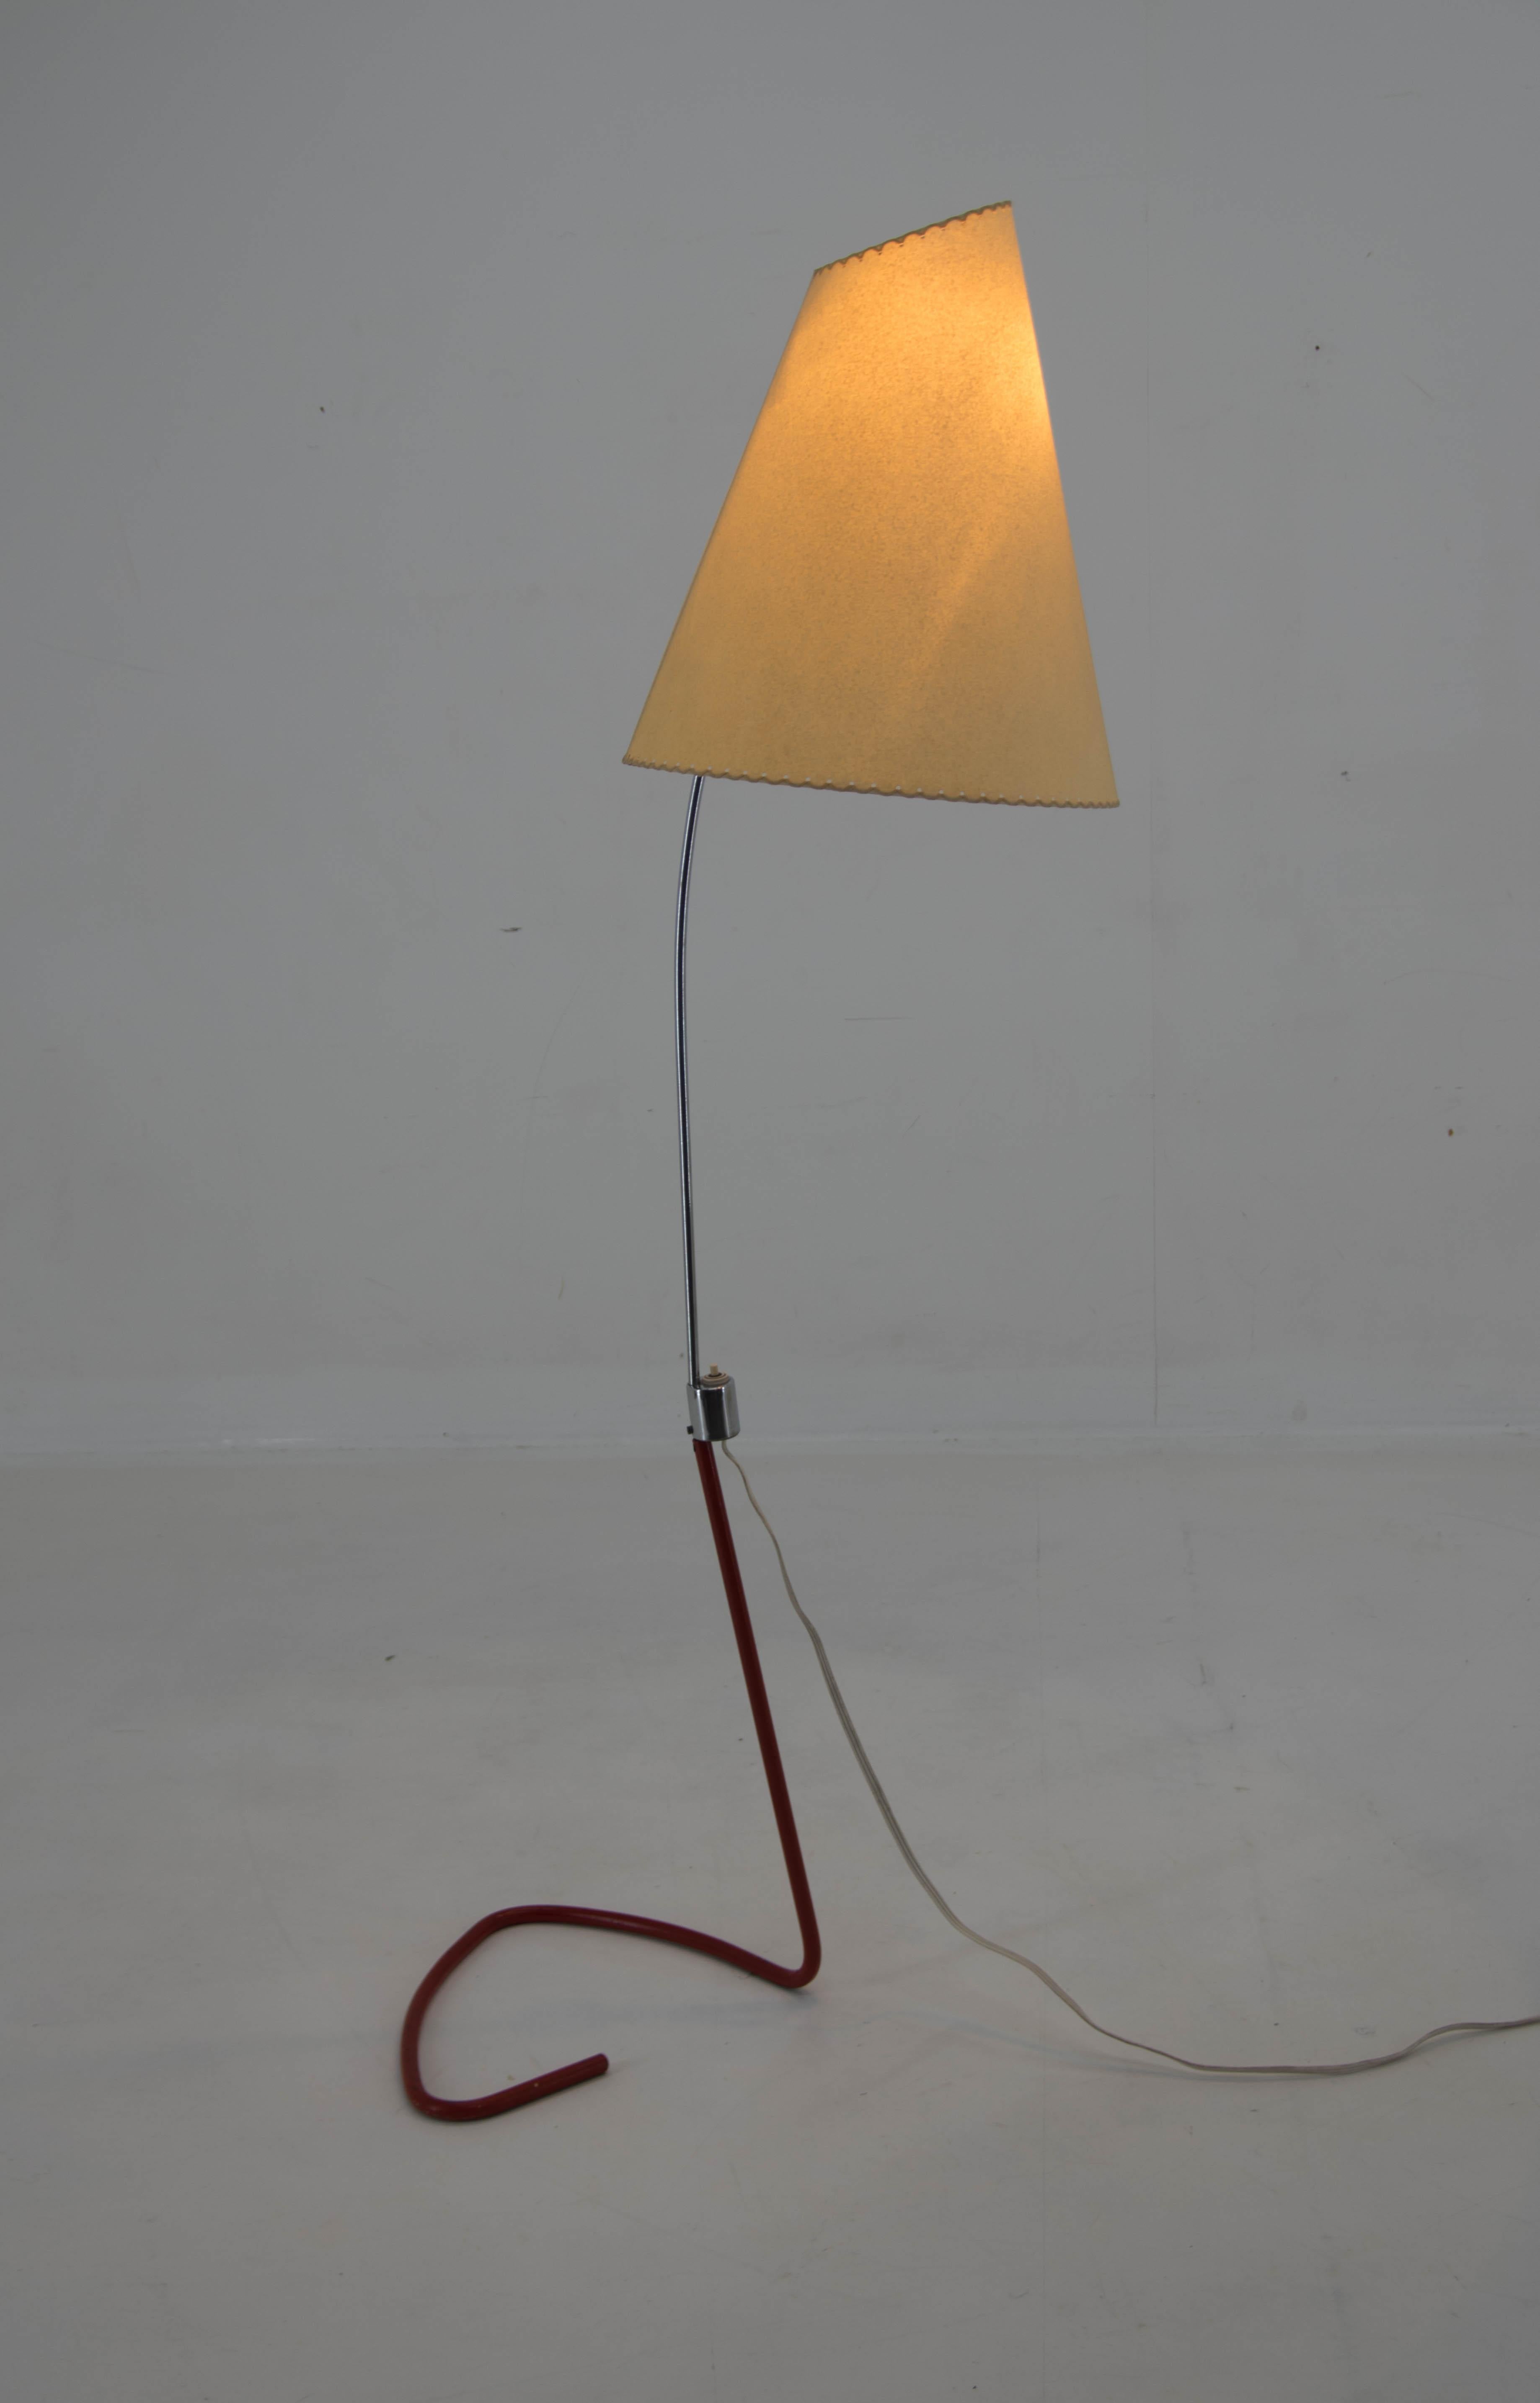 Minimalistic iconic floor lamp designed by Josef Hurka for Napako, made in Czechoslovakia in 1960s, labeled.
Red paint on metal base with age patina, chrome polished, new parchment paper shade.
Rewired: 1x60W, E25-E27 bulb.
US plug adapter included.